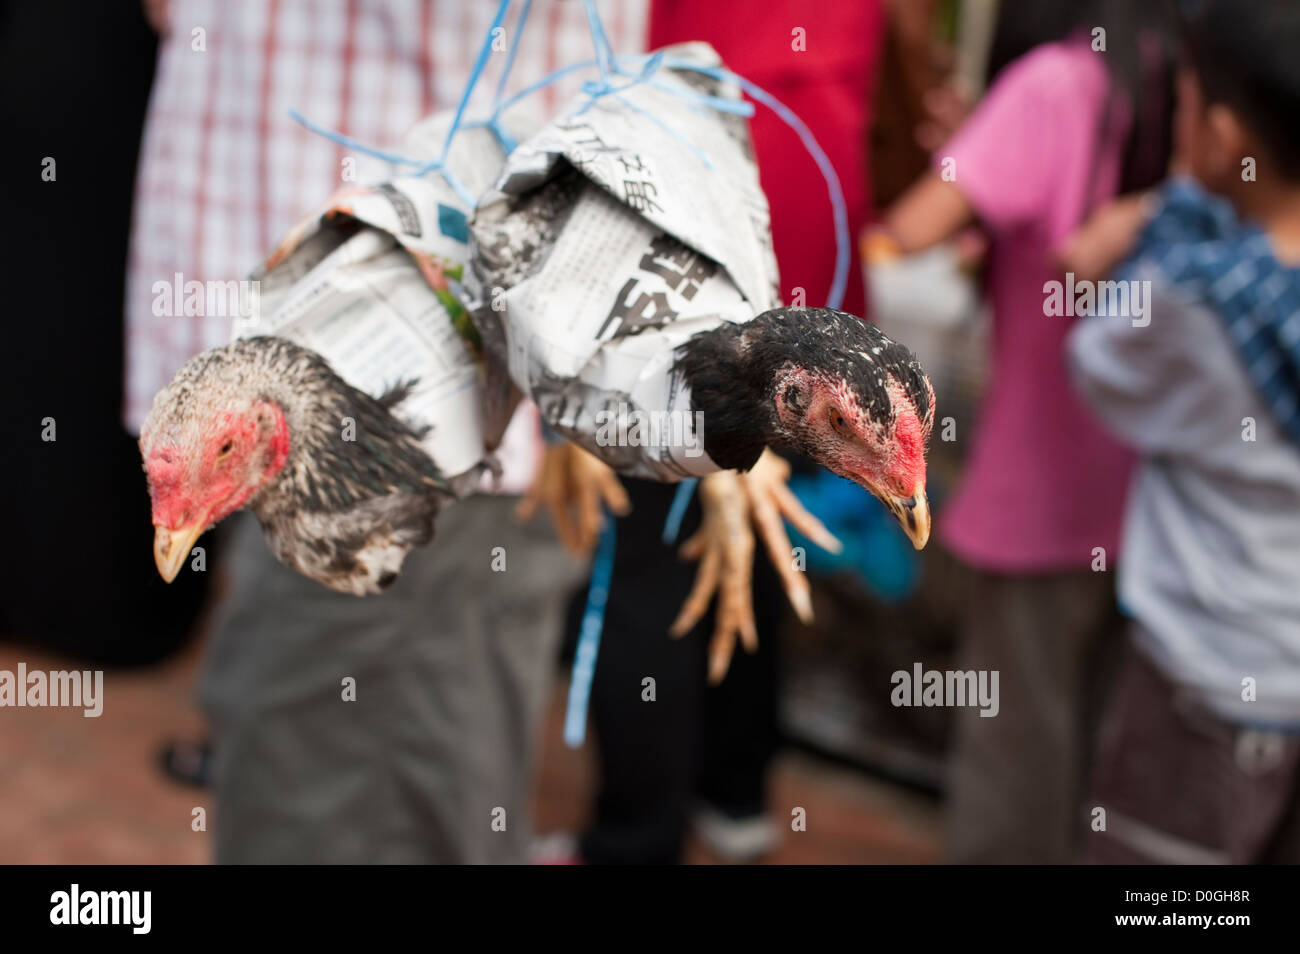 Chickens bought at a market wrapped up to take home, Brunei Stock Photo